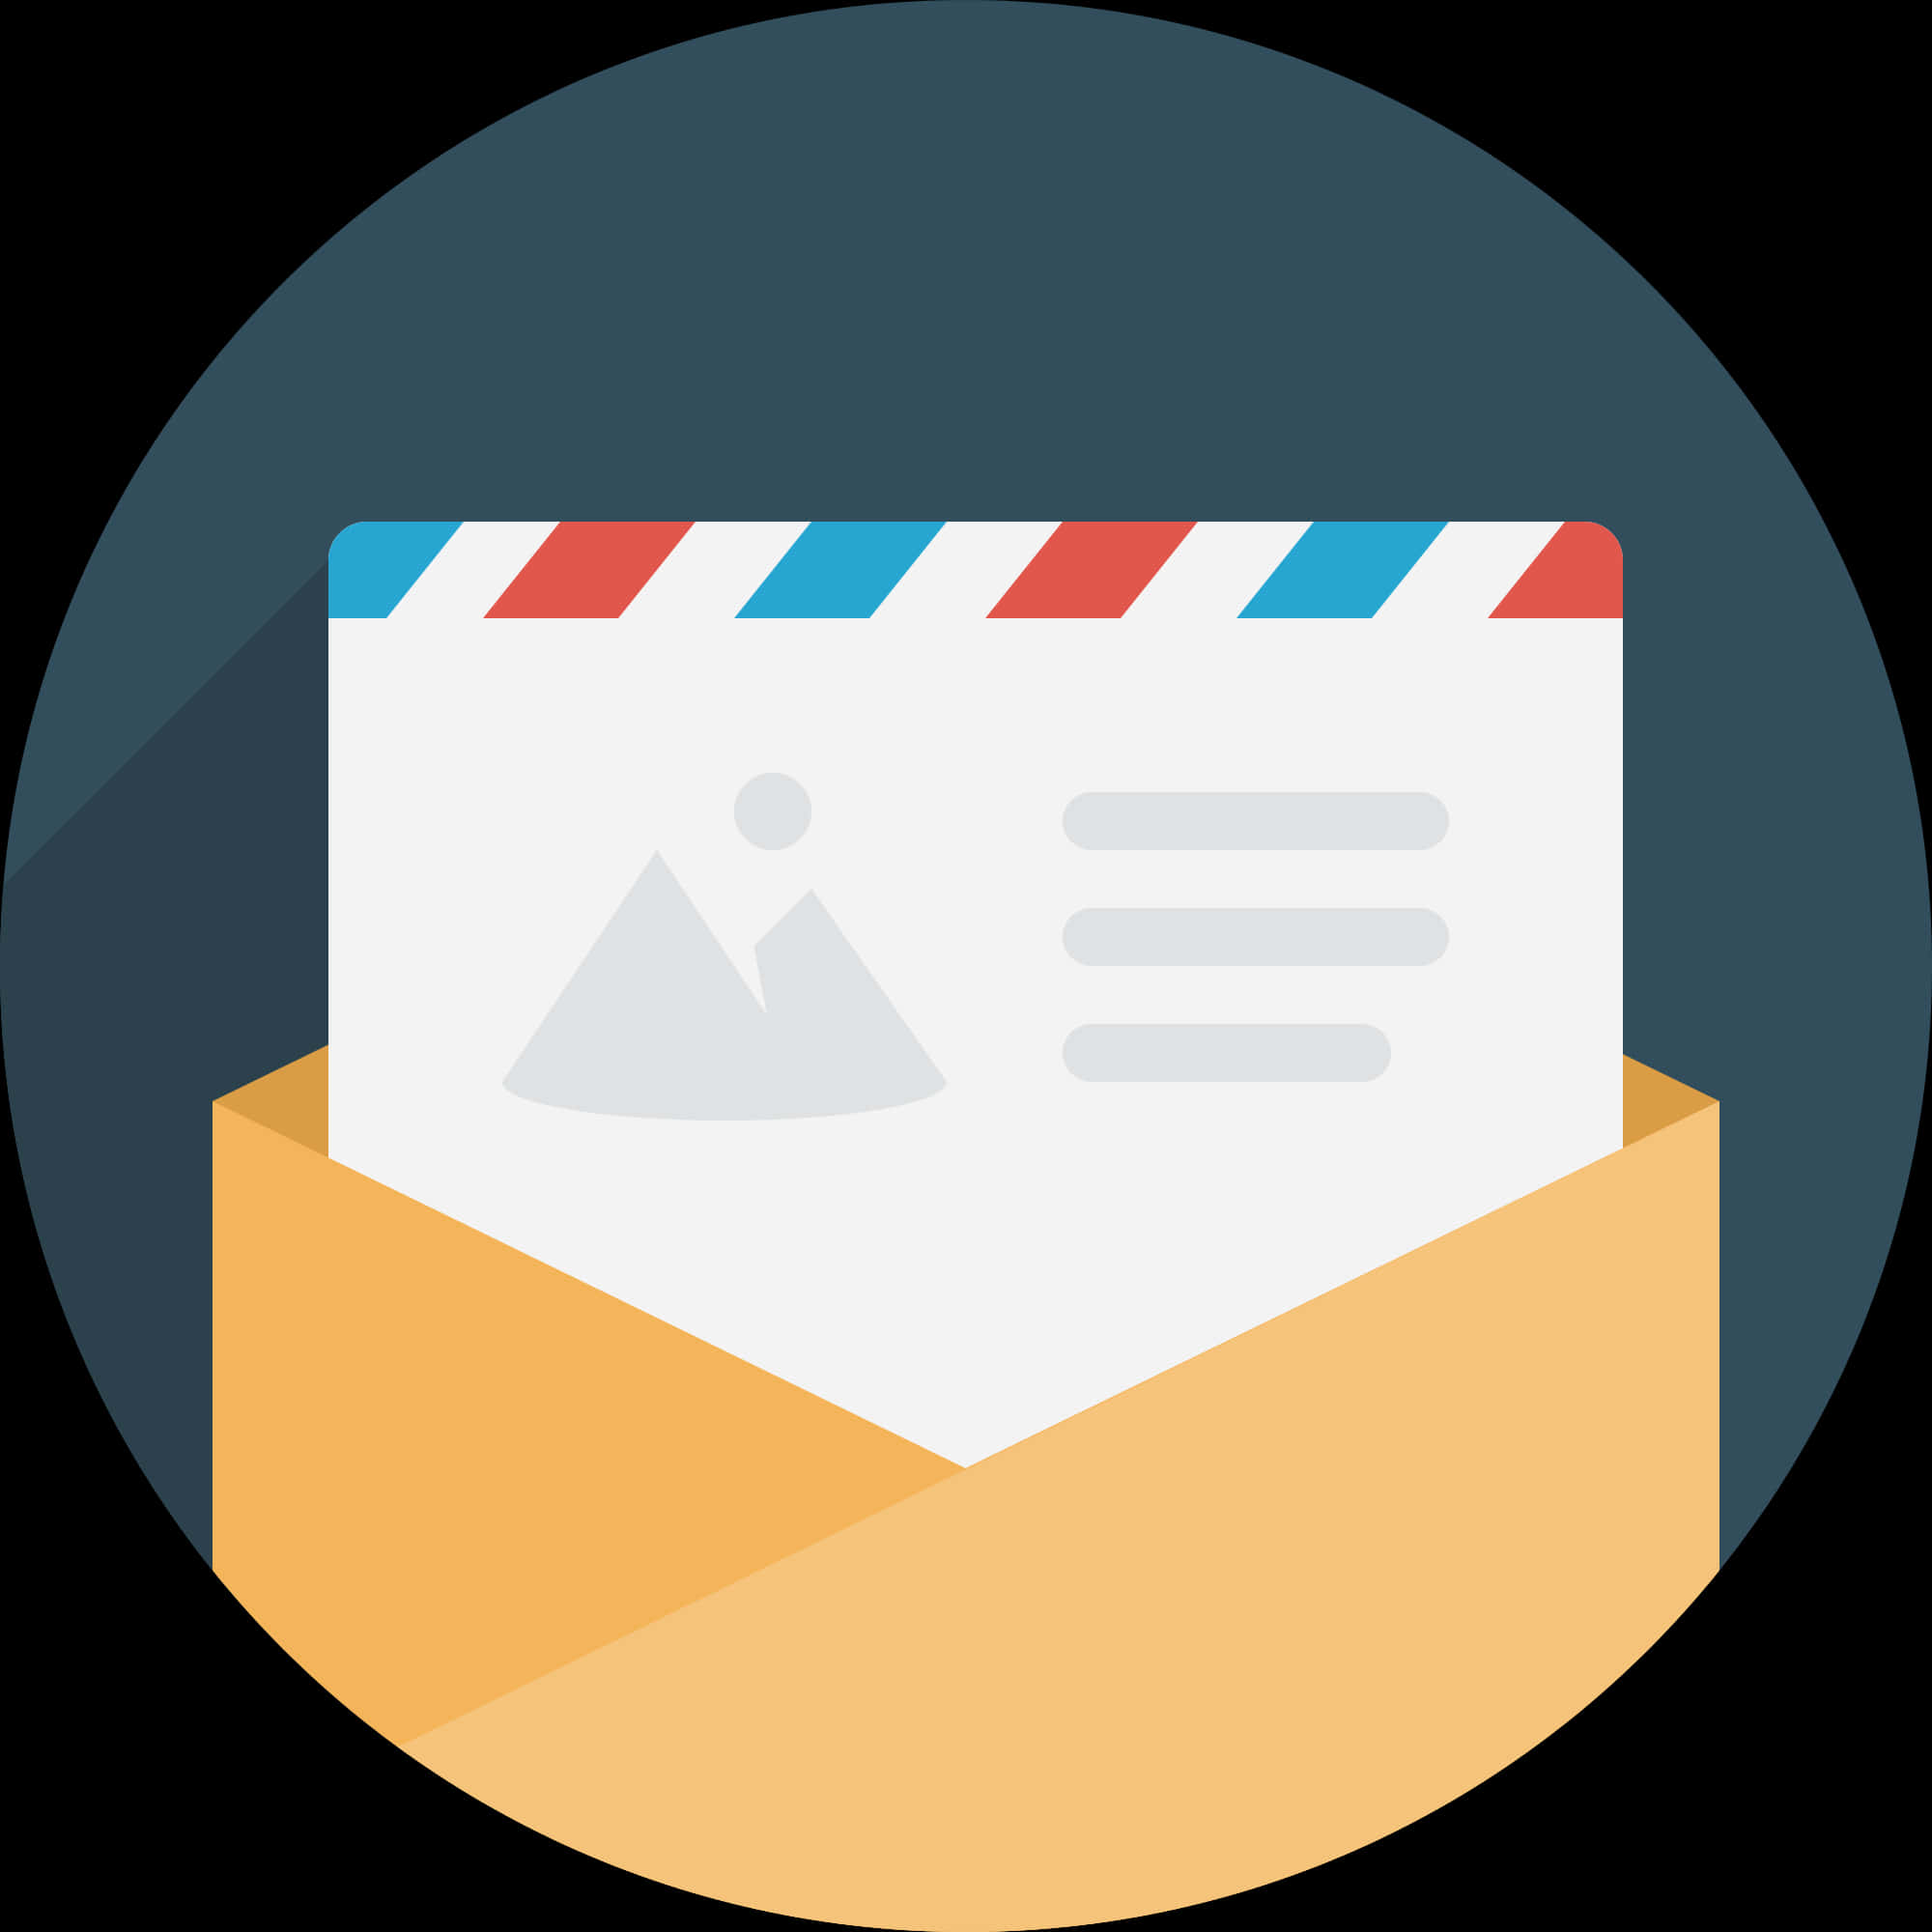 Email Envelope Icon PNG